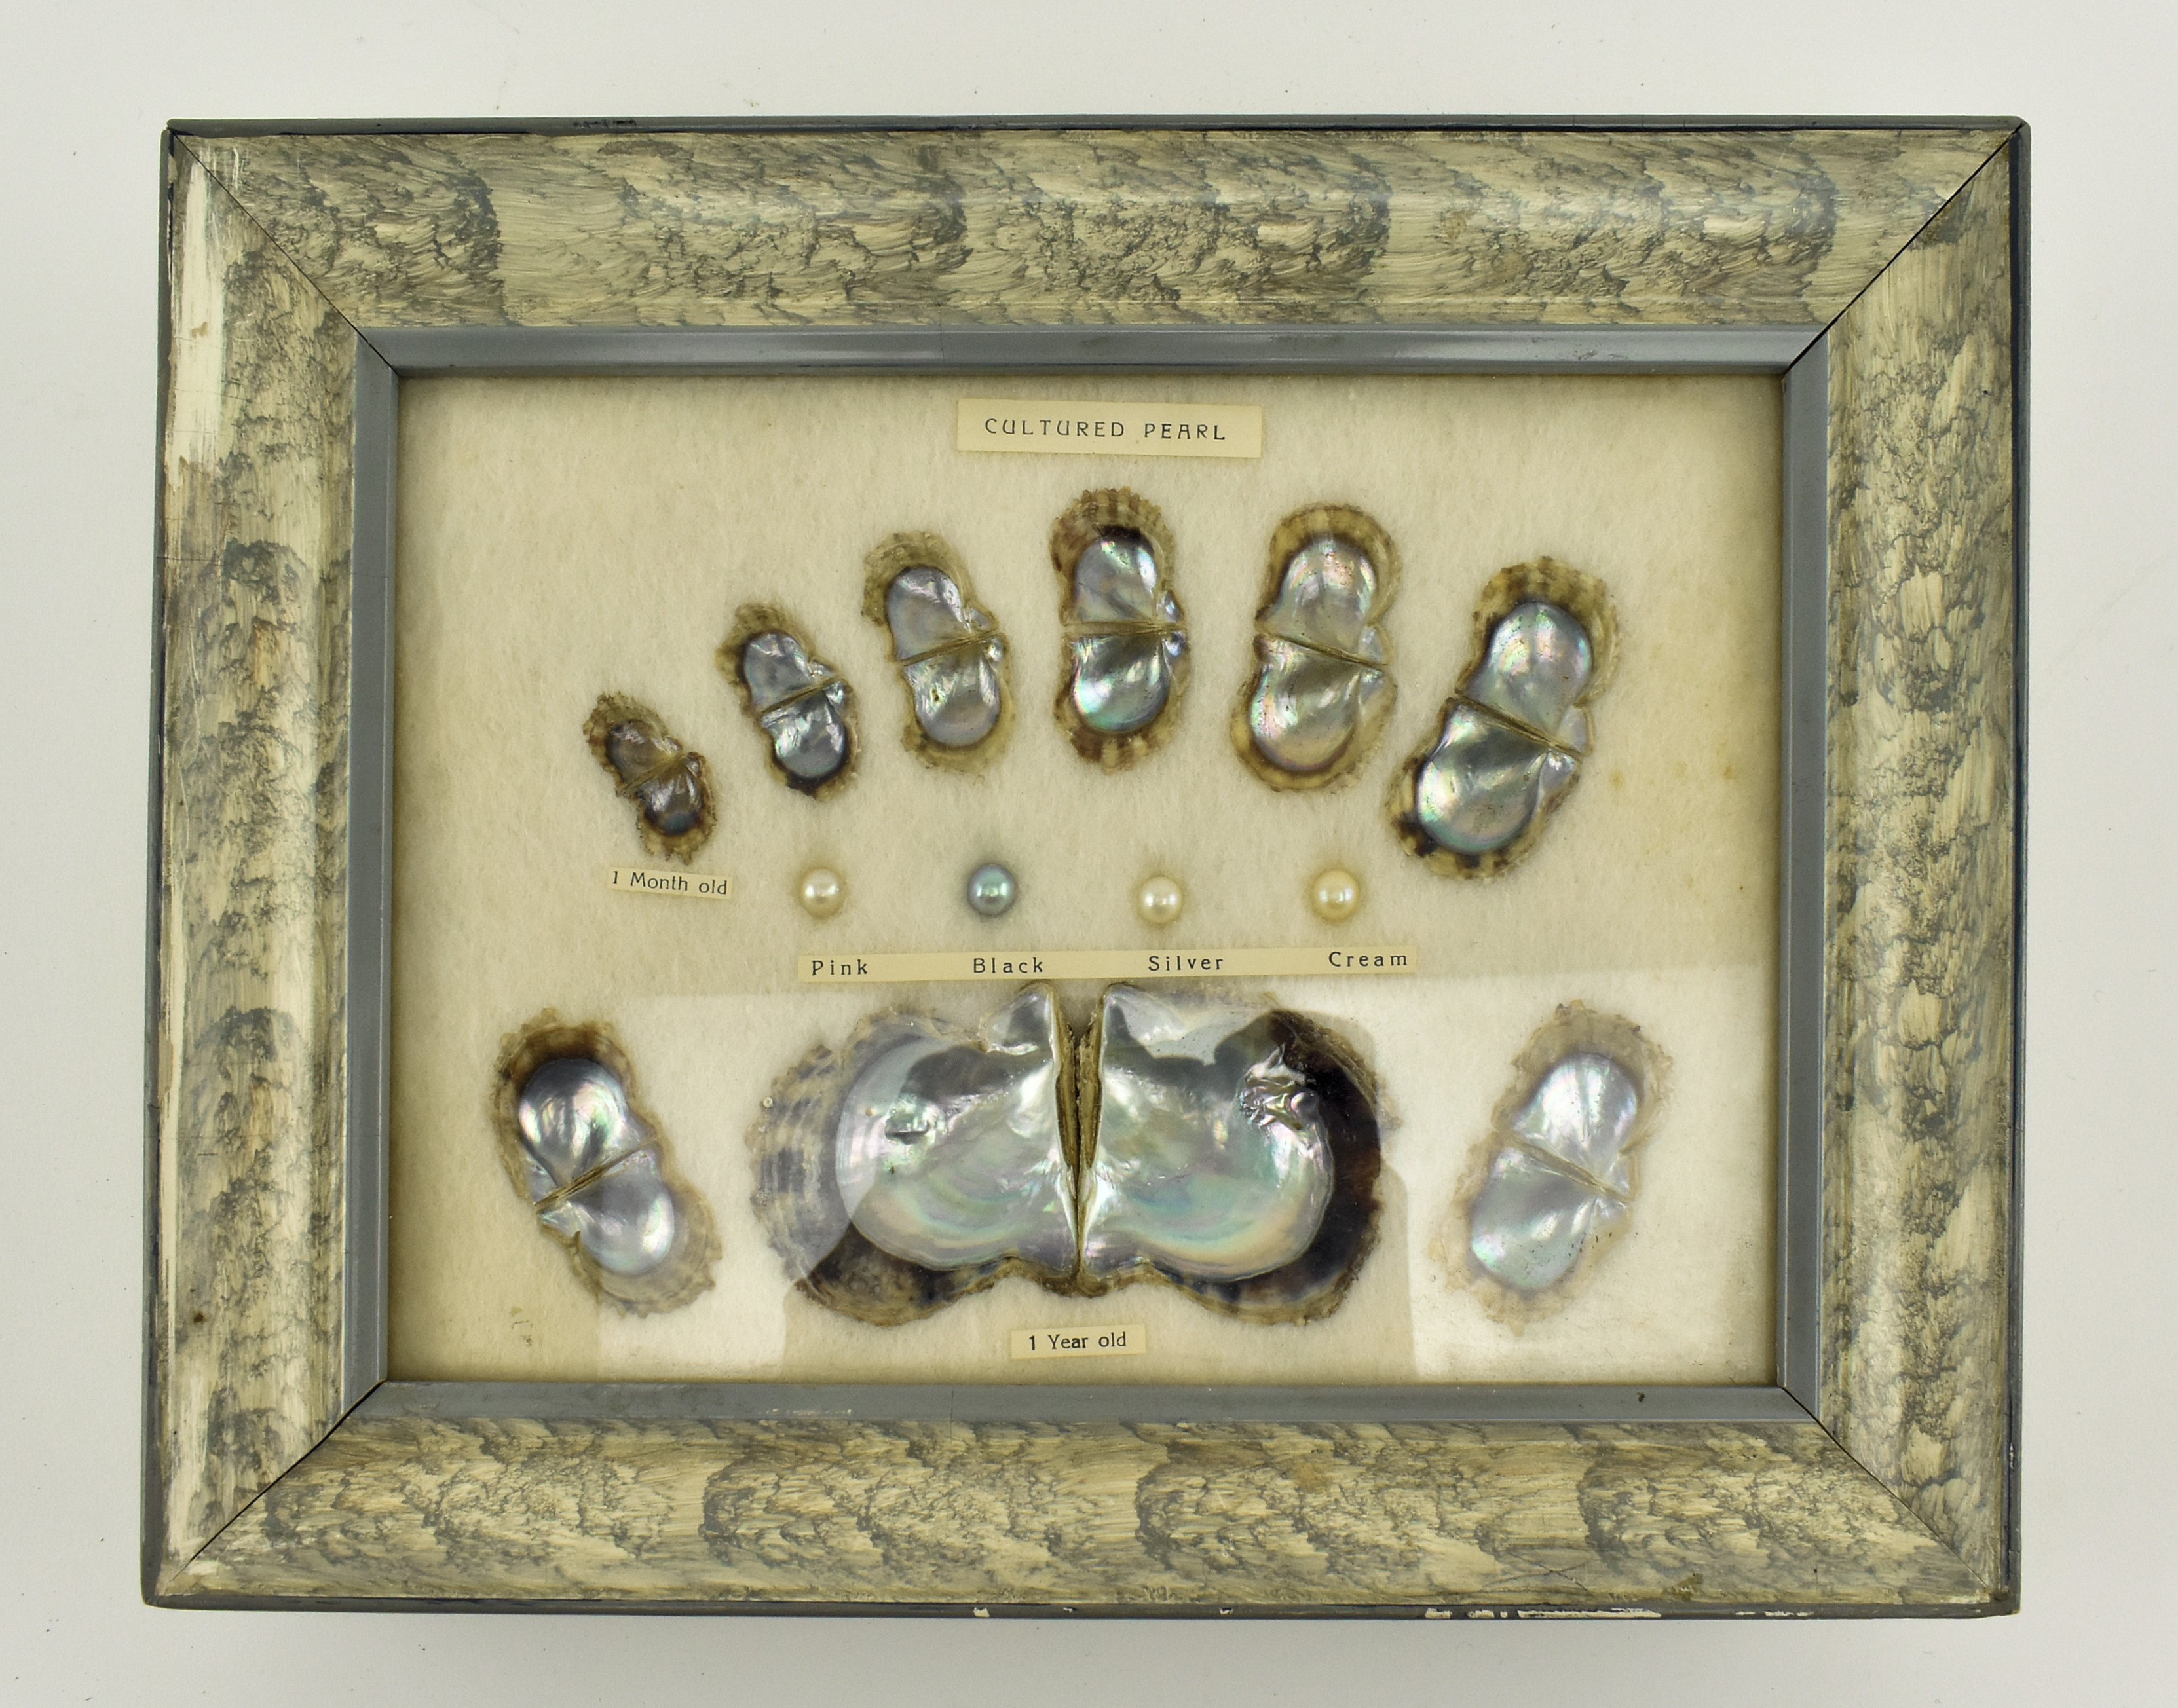 FRAMED DISPLAY CASE OF THE LIFESPAN OF CULTURED PEARLS